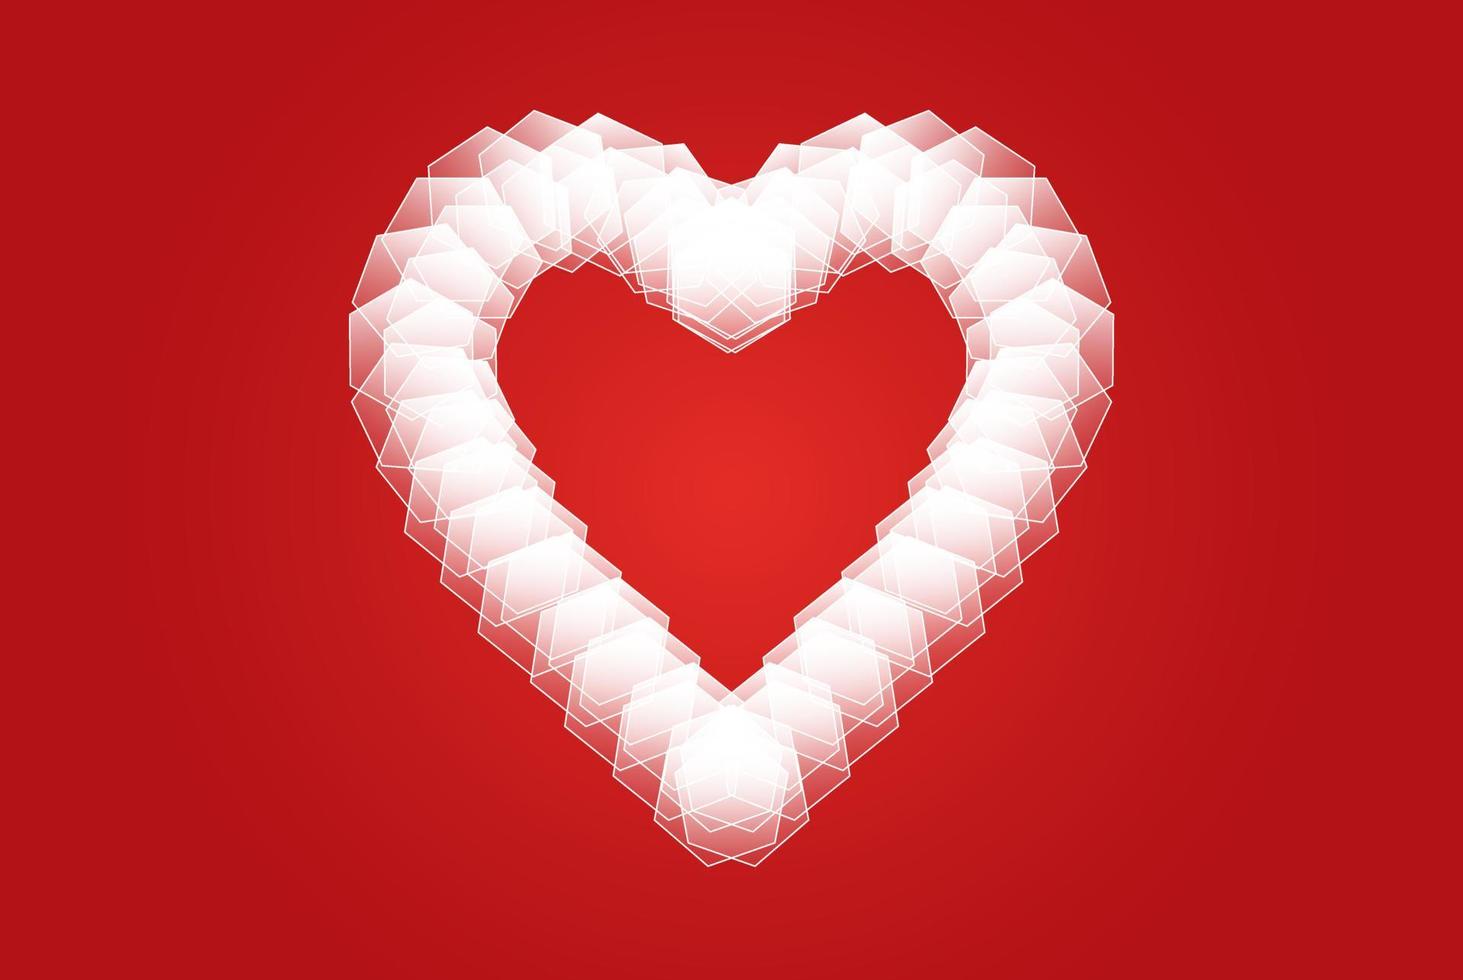 Digital white Pixel art Heart shape isolated on red background. Beautiful Seamless vector pixel love hearts pattern. Creative and stylish design for banner, background, card and social media